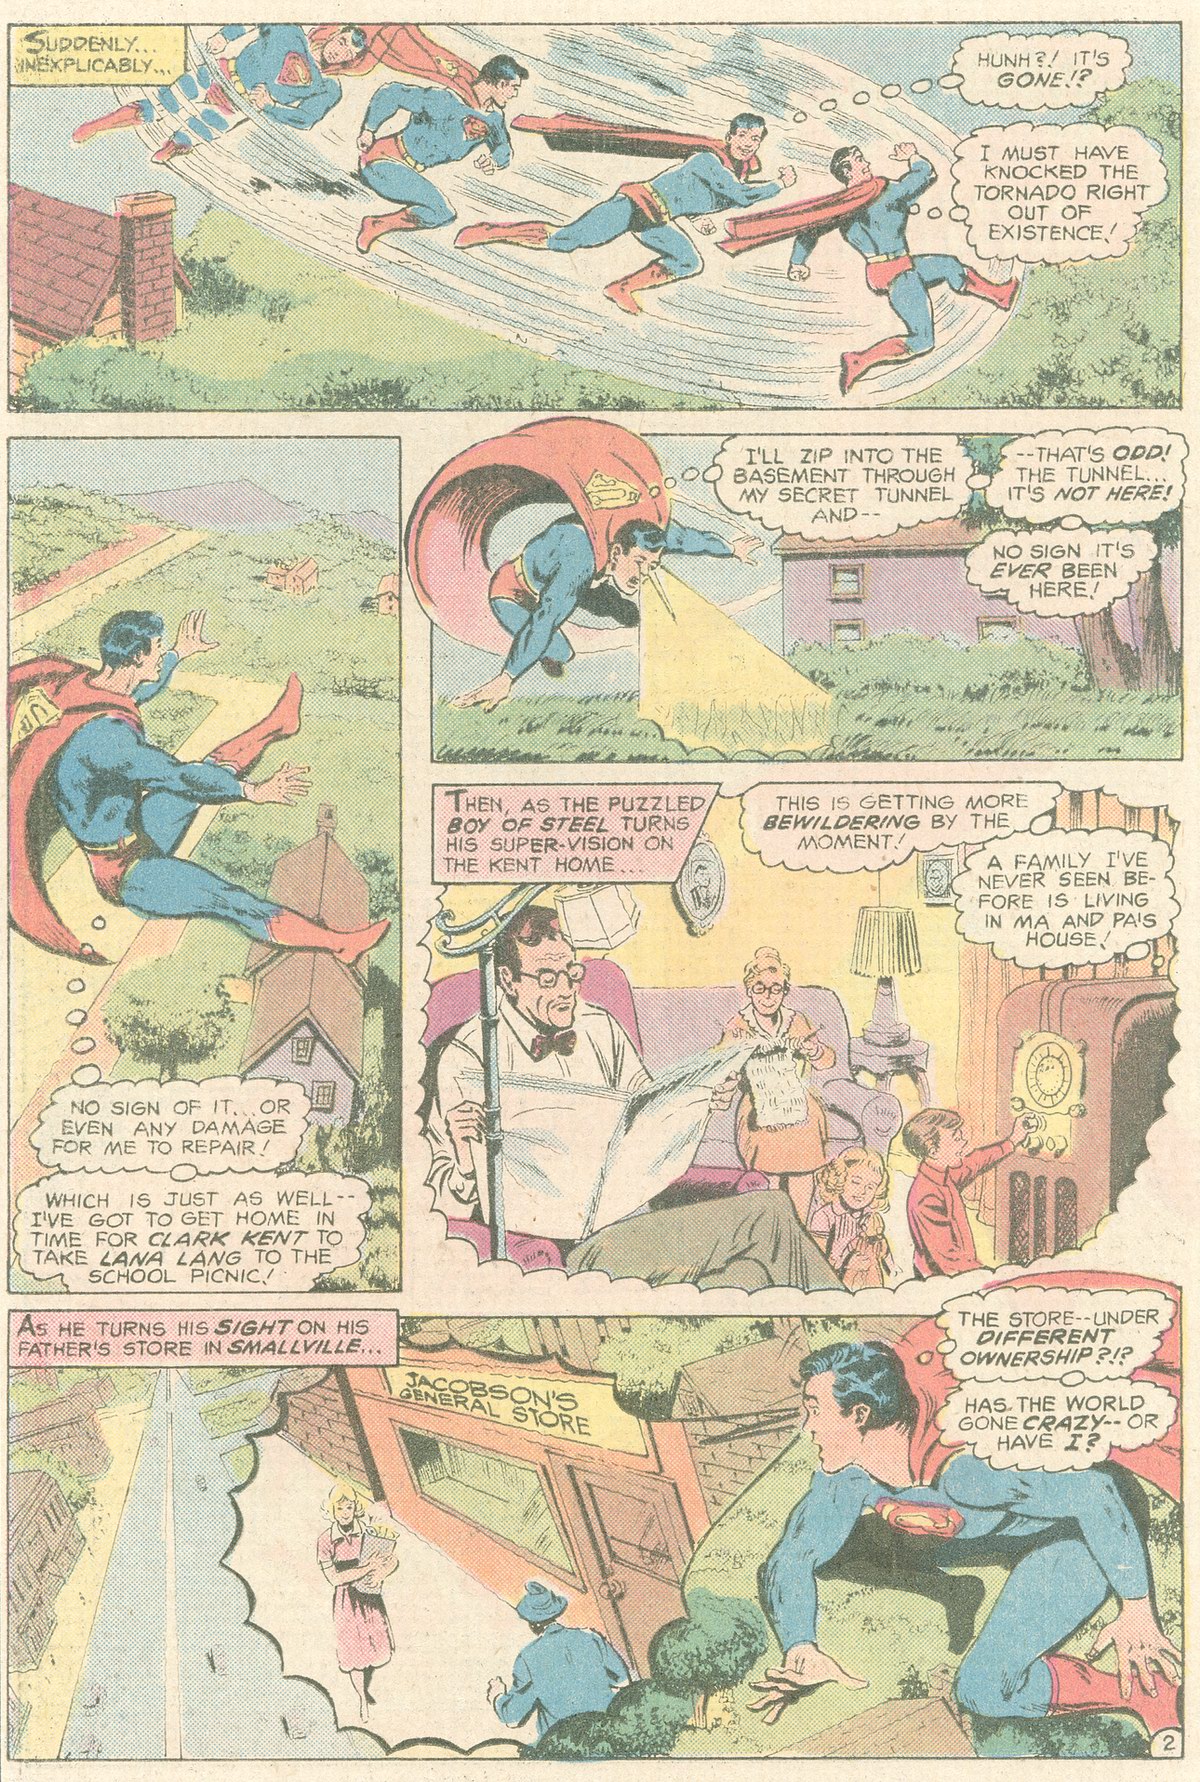 The New Adventures of Superboy 15 Page 19